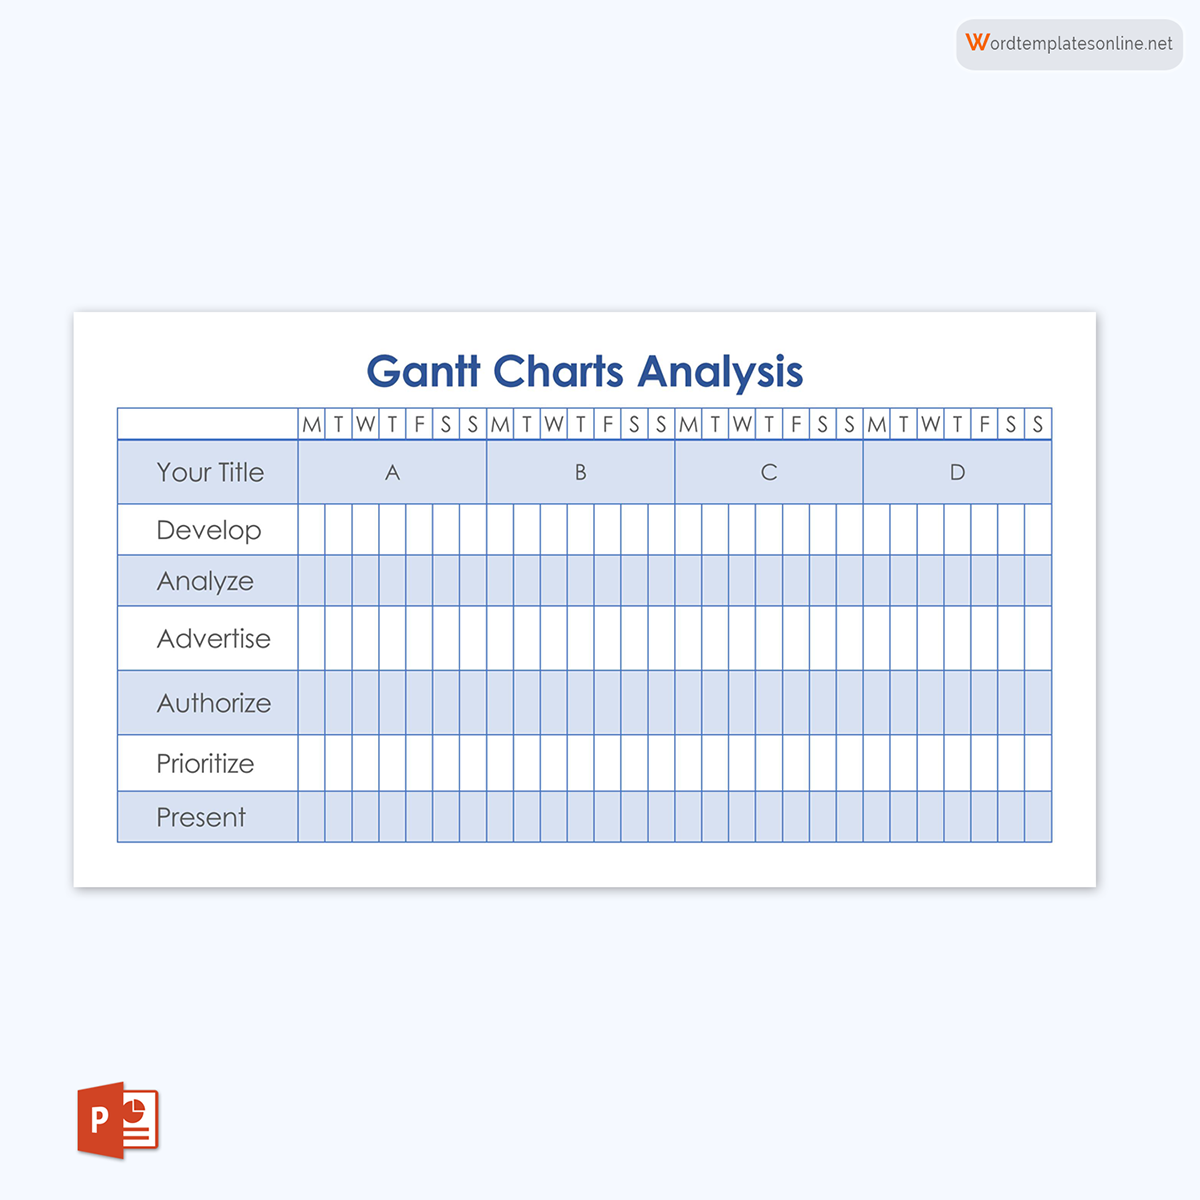 Great Fillable Monthly Gantt Chart Analysis Template 01 as PowerPoint Slides